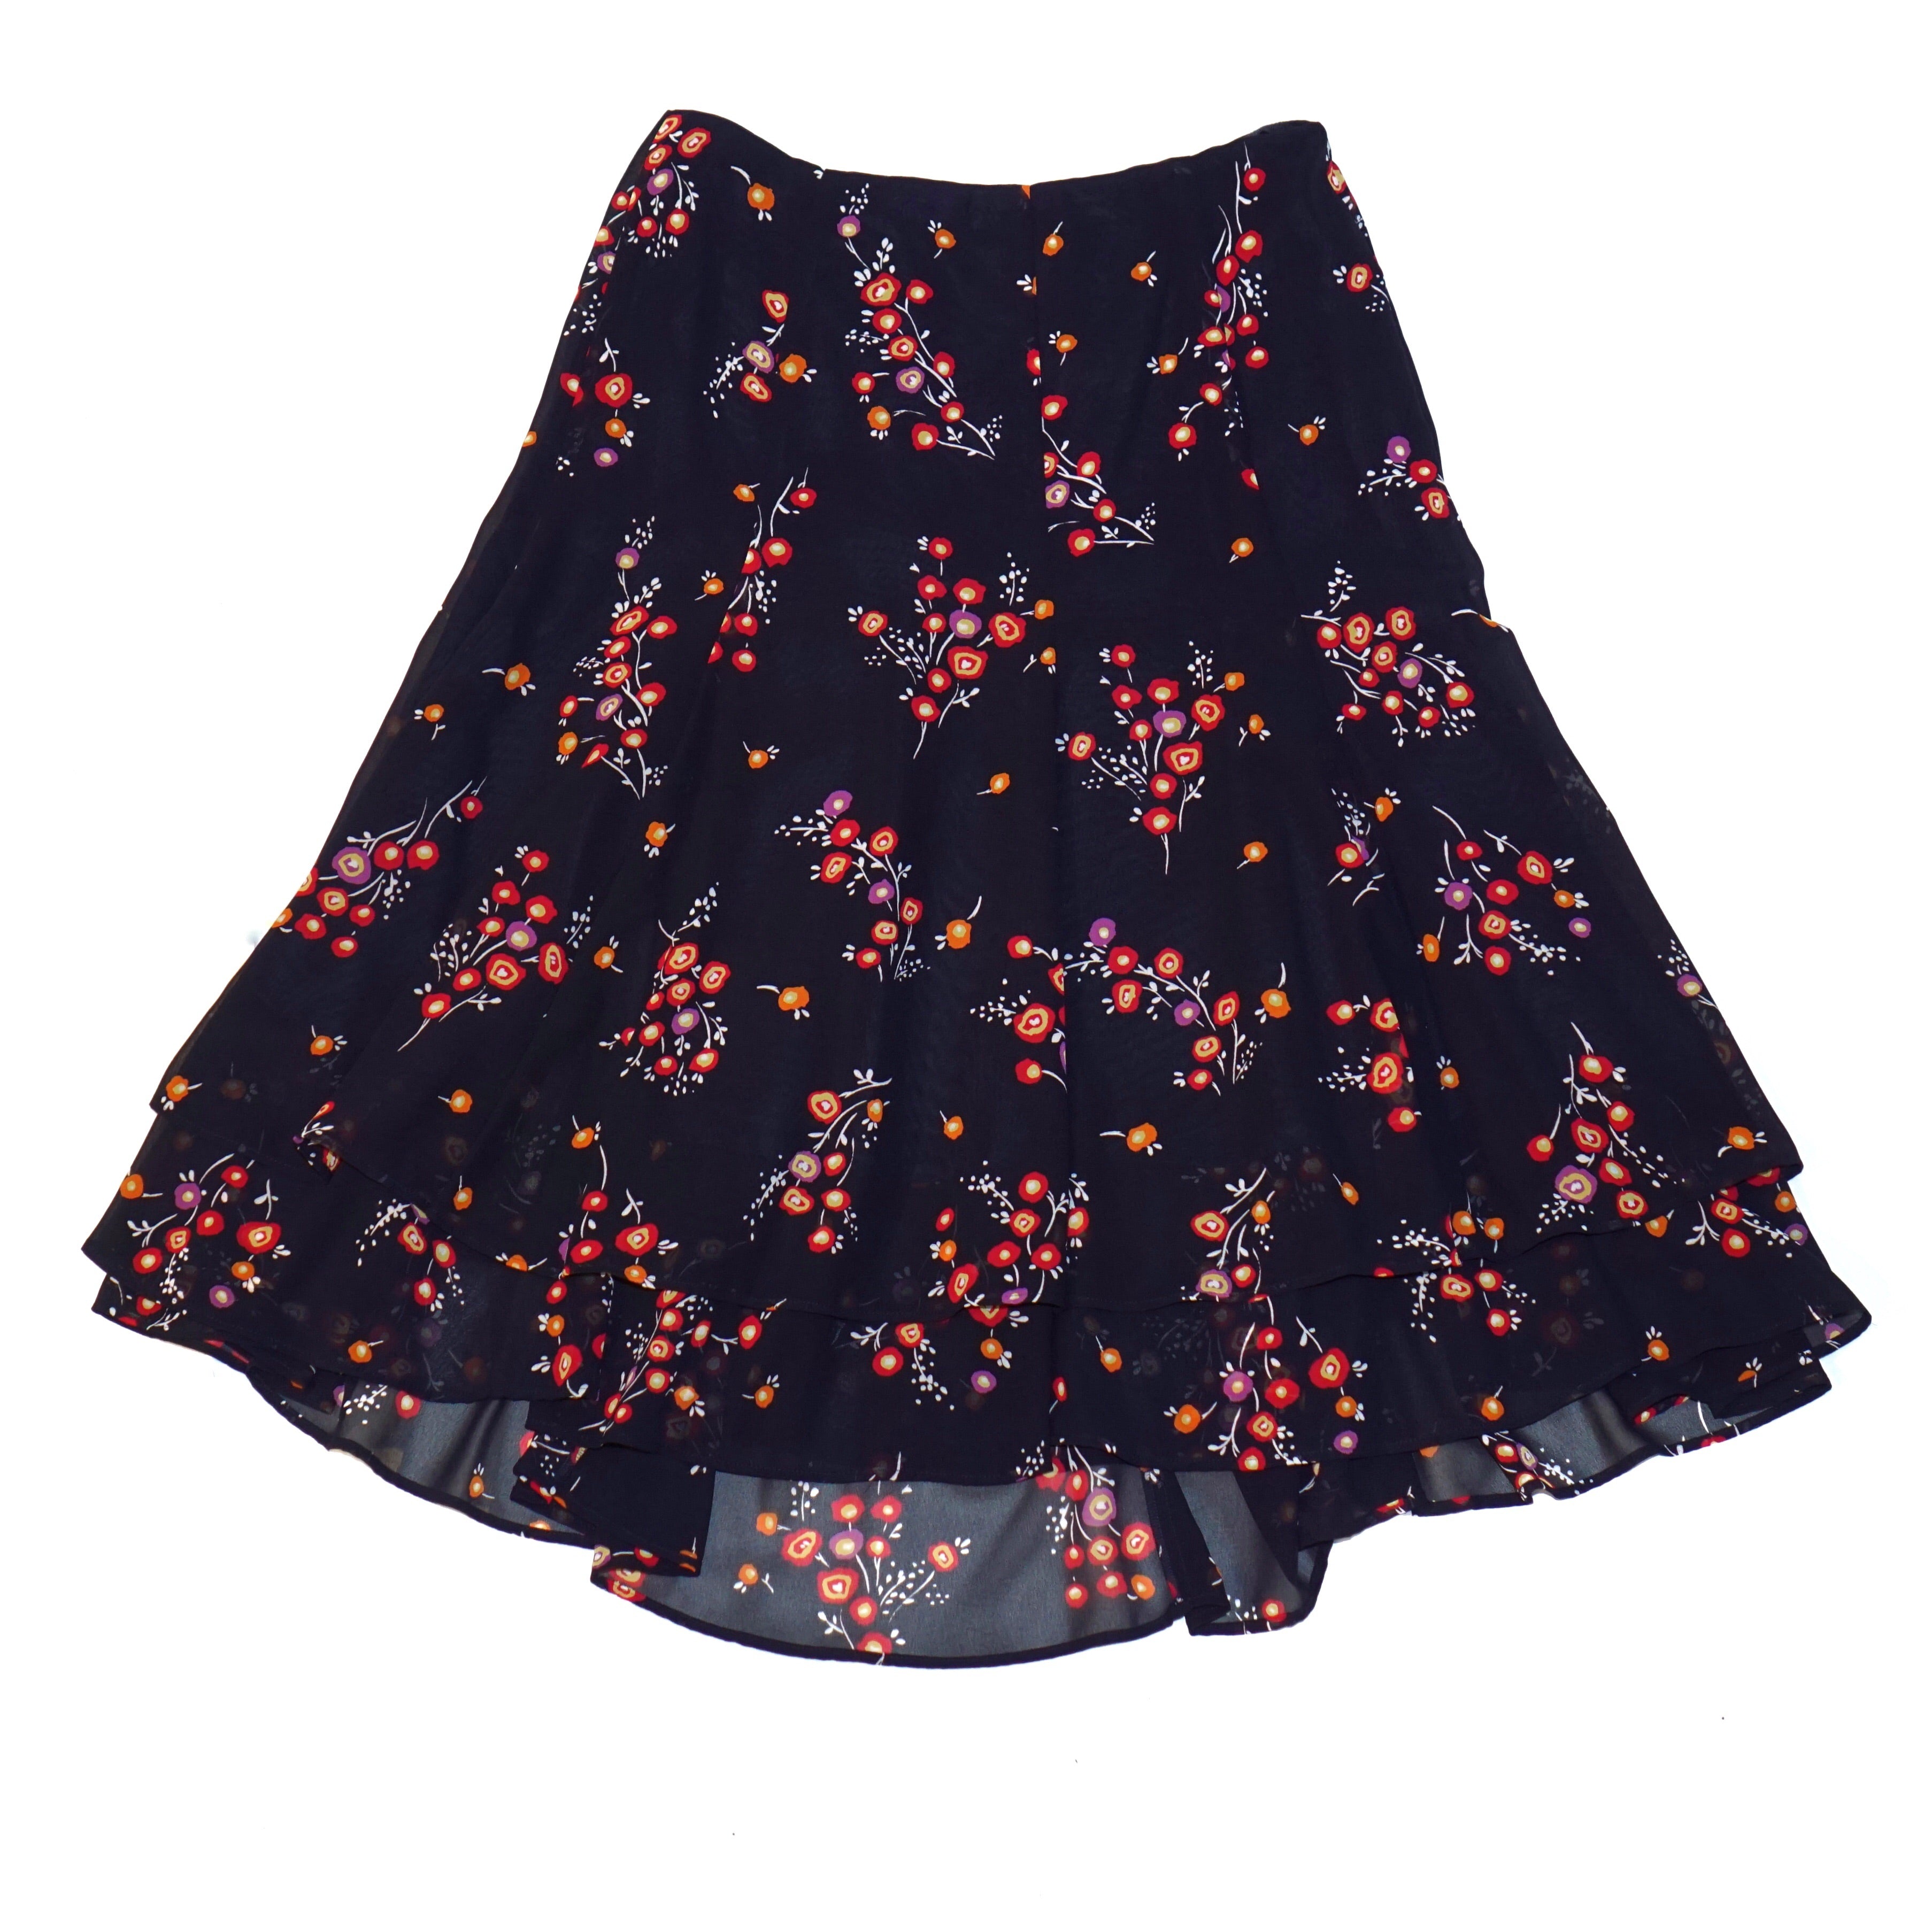 UNITED ARROWS / FLORAL SKIRT